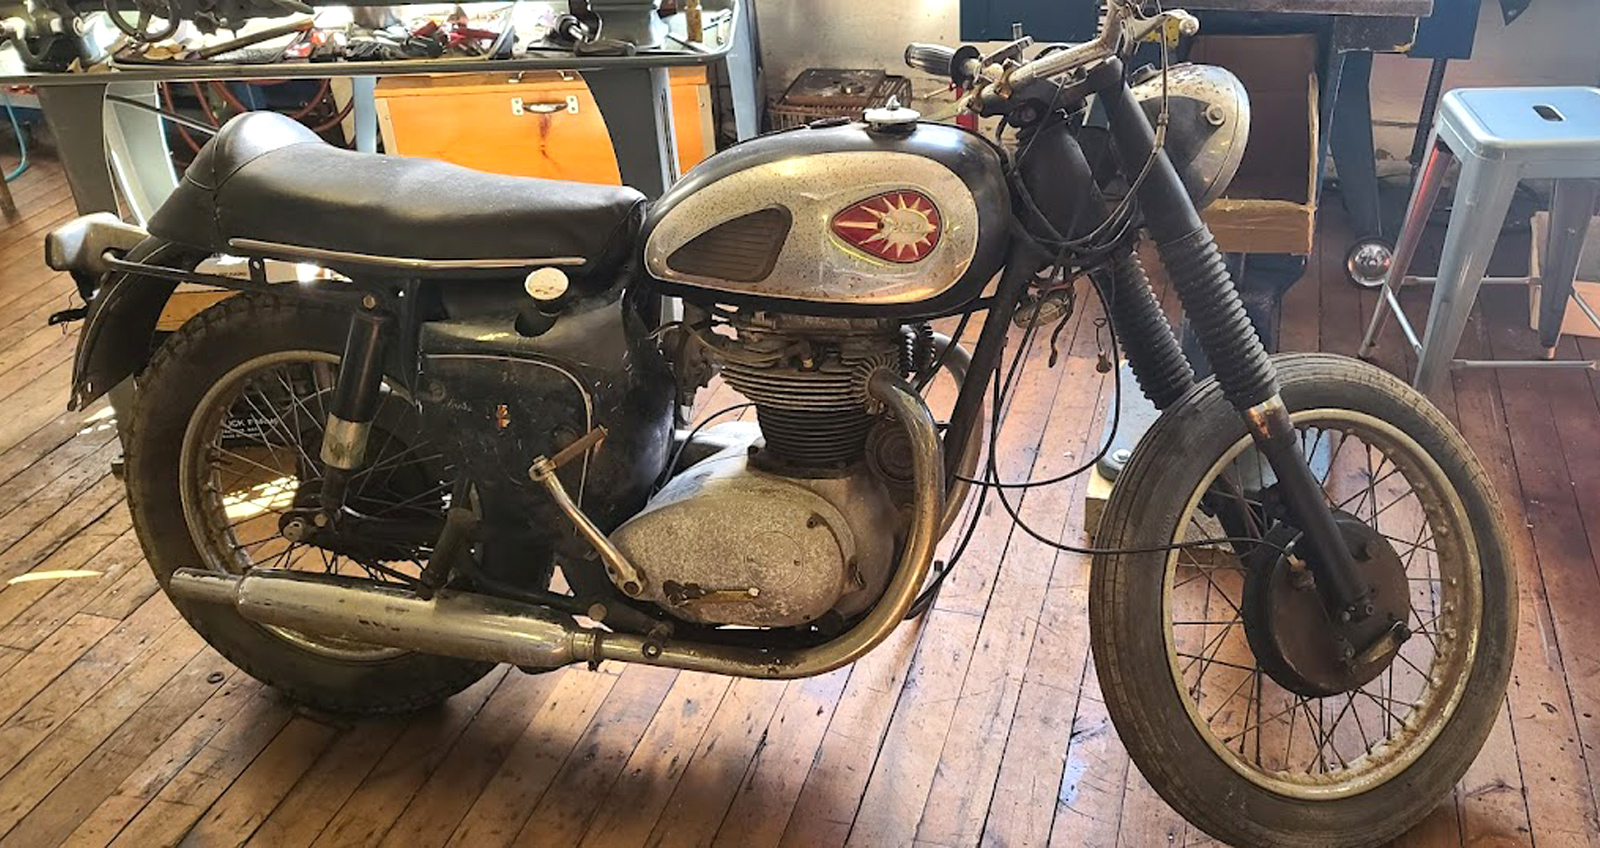 Want to restore a vintage motorcycle? We can help!